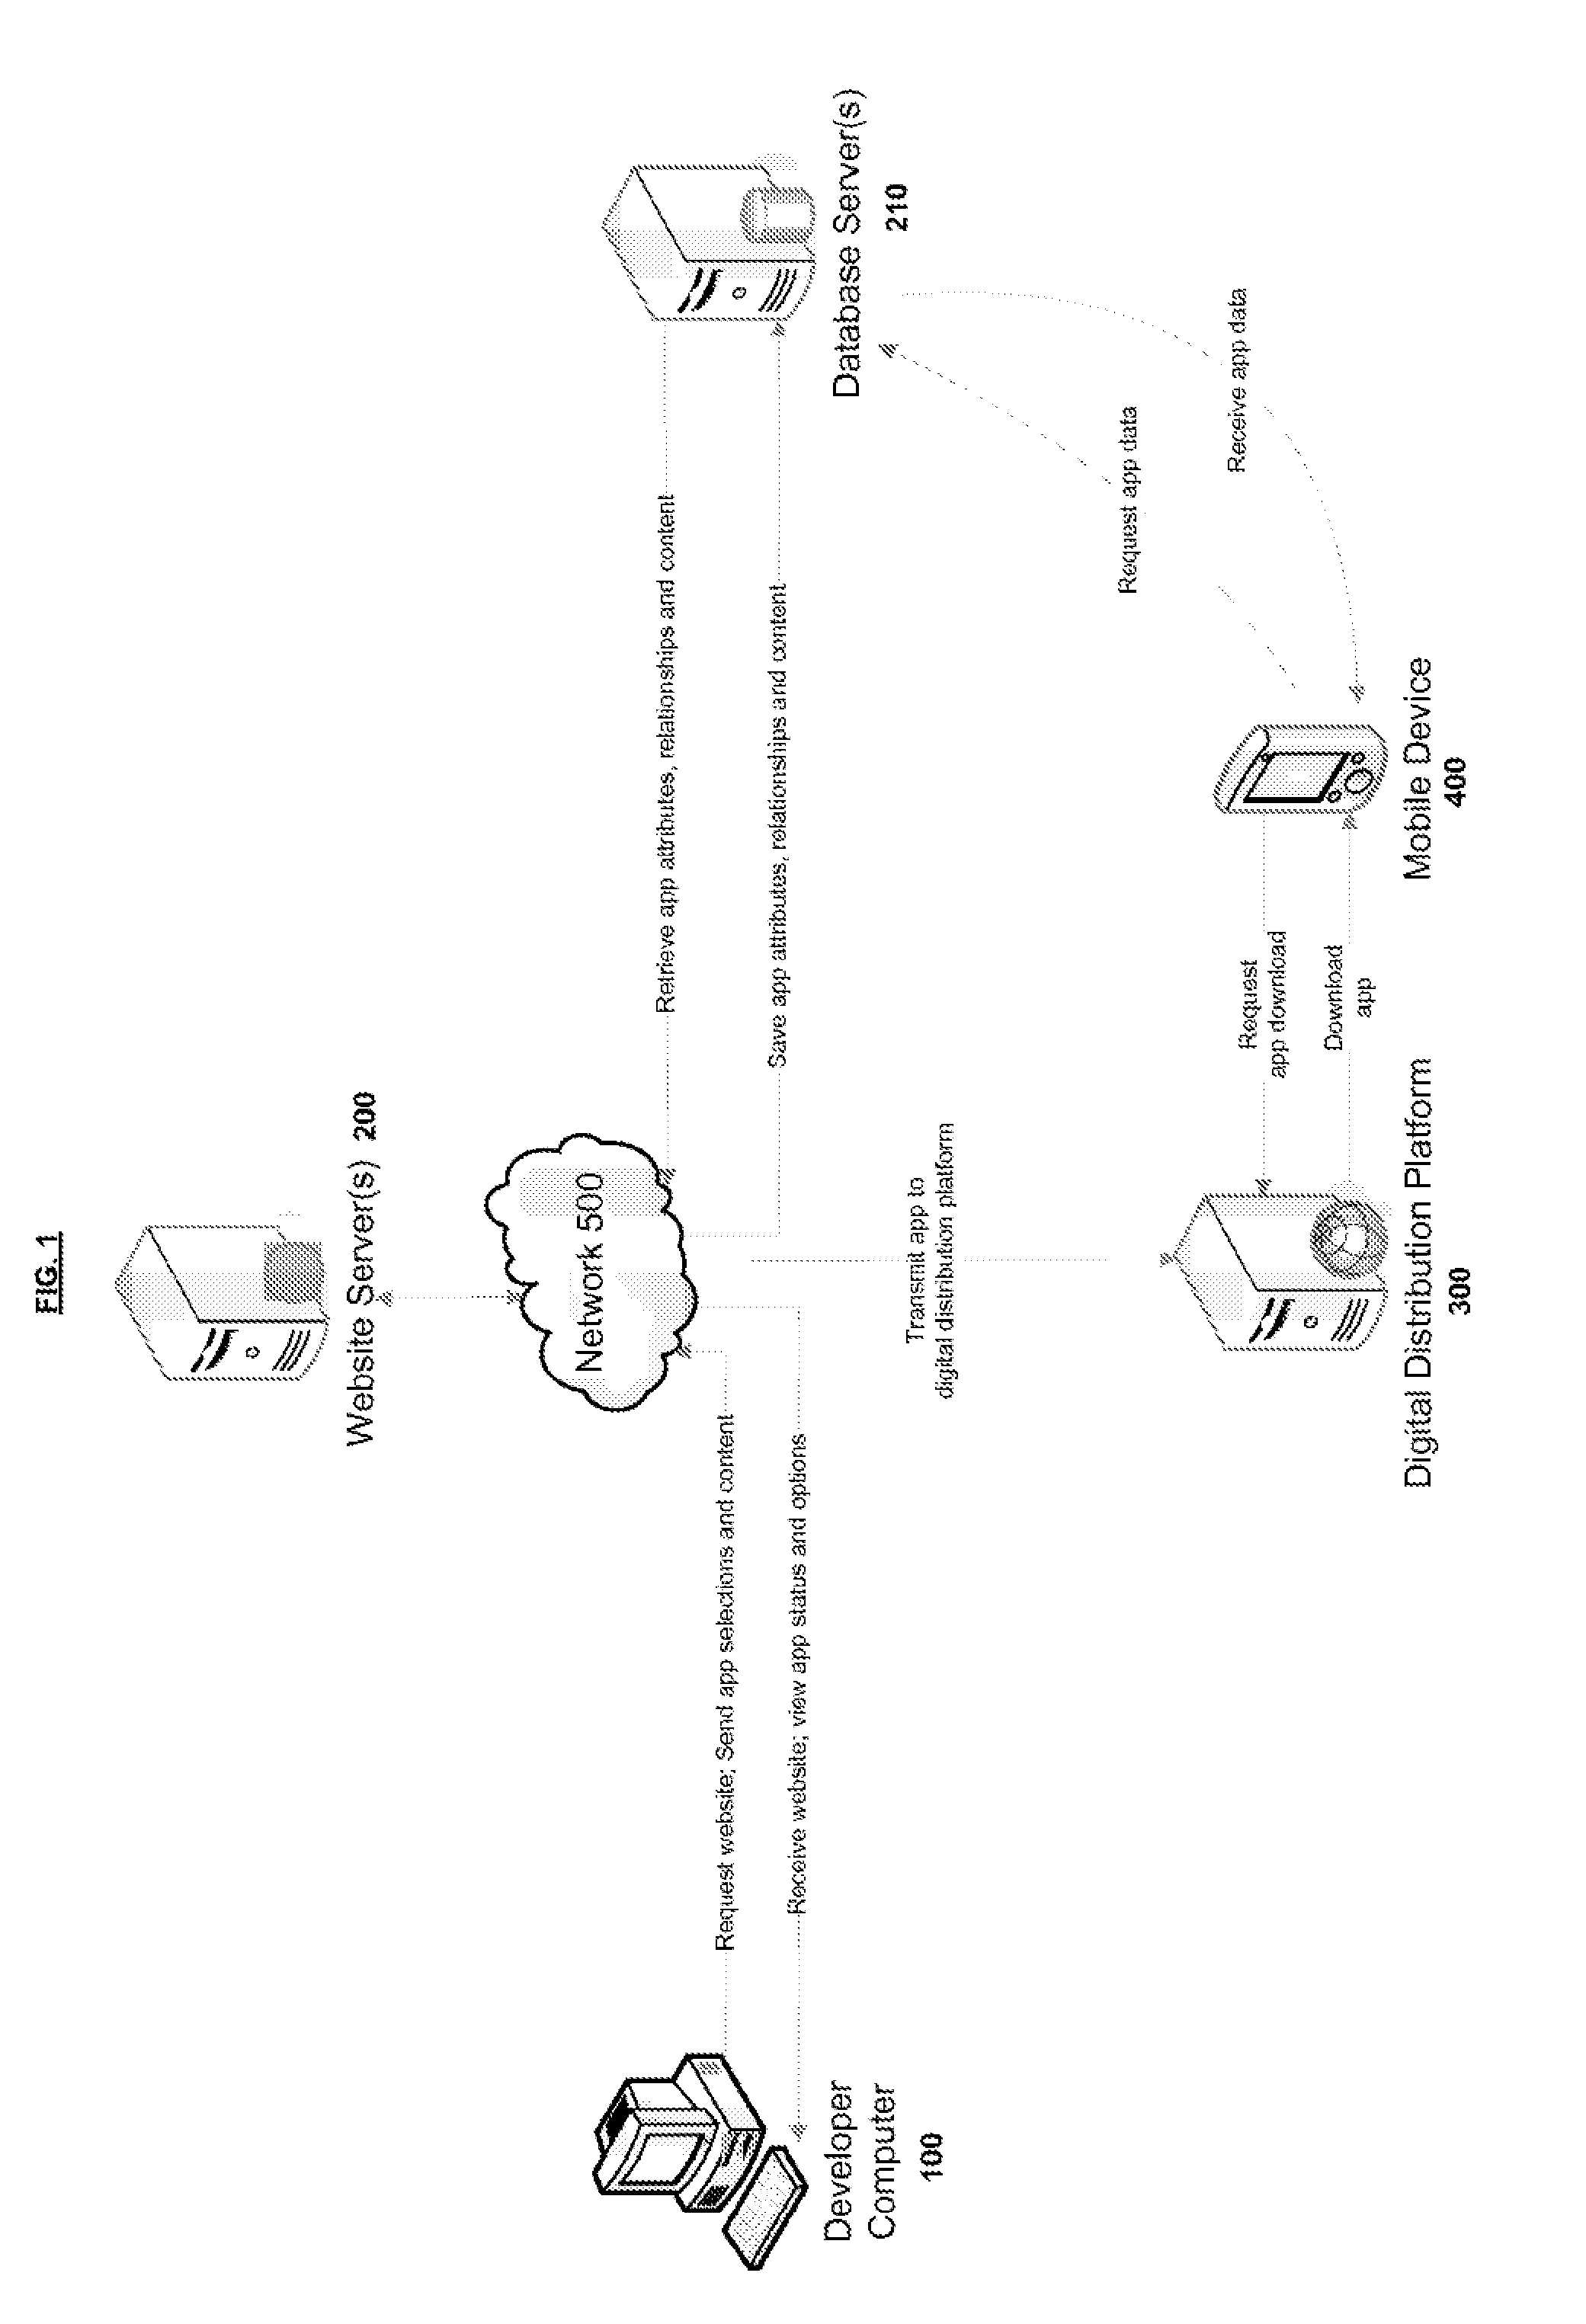 Systems and methods for a mobile business application development and deployment platform